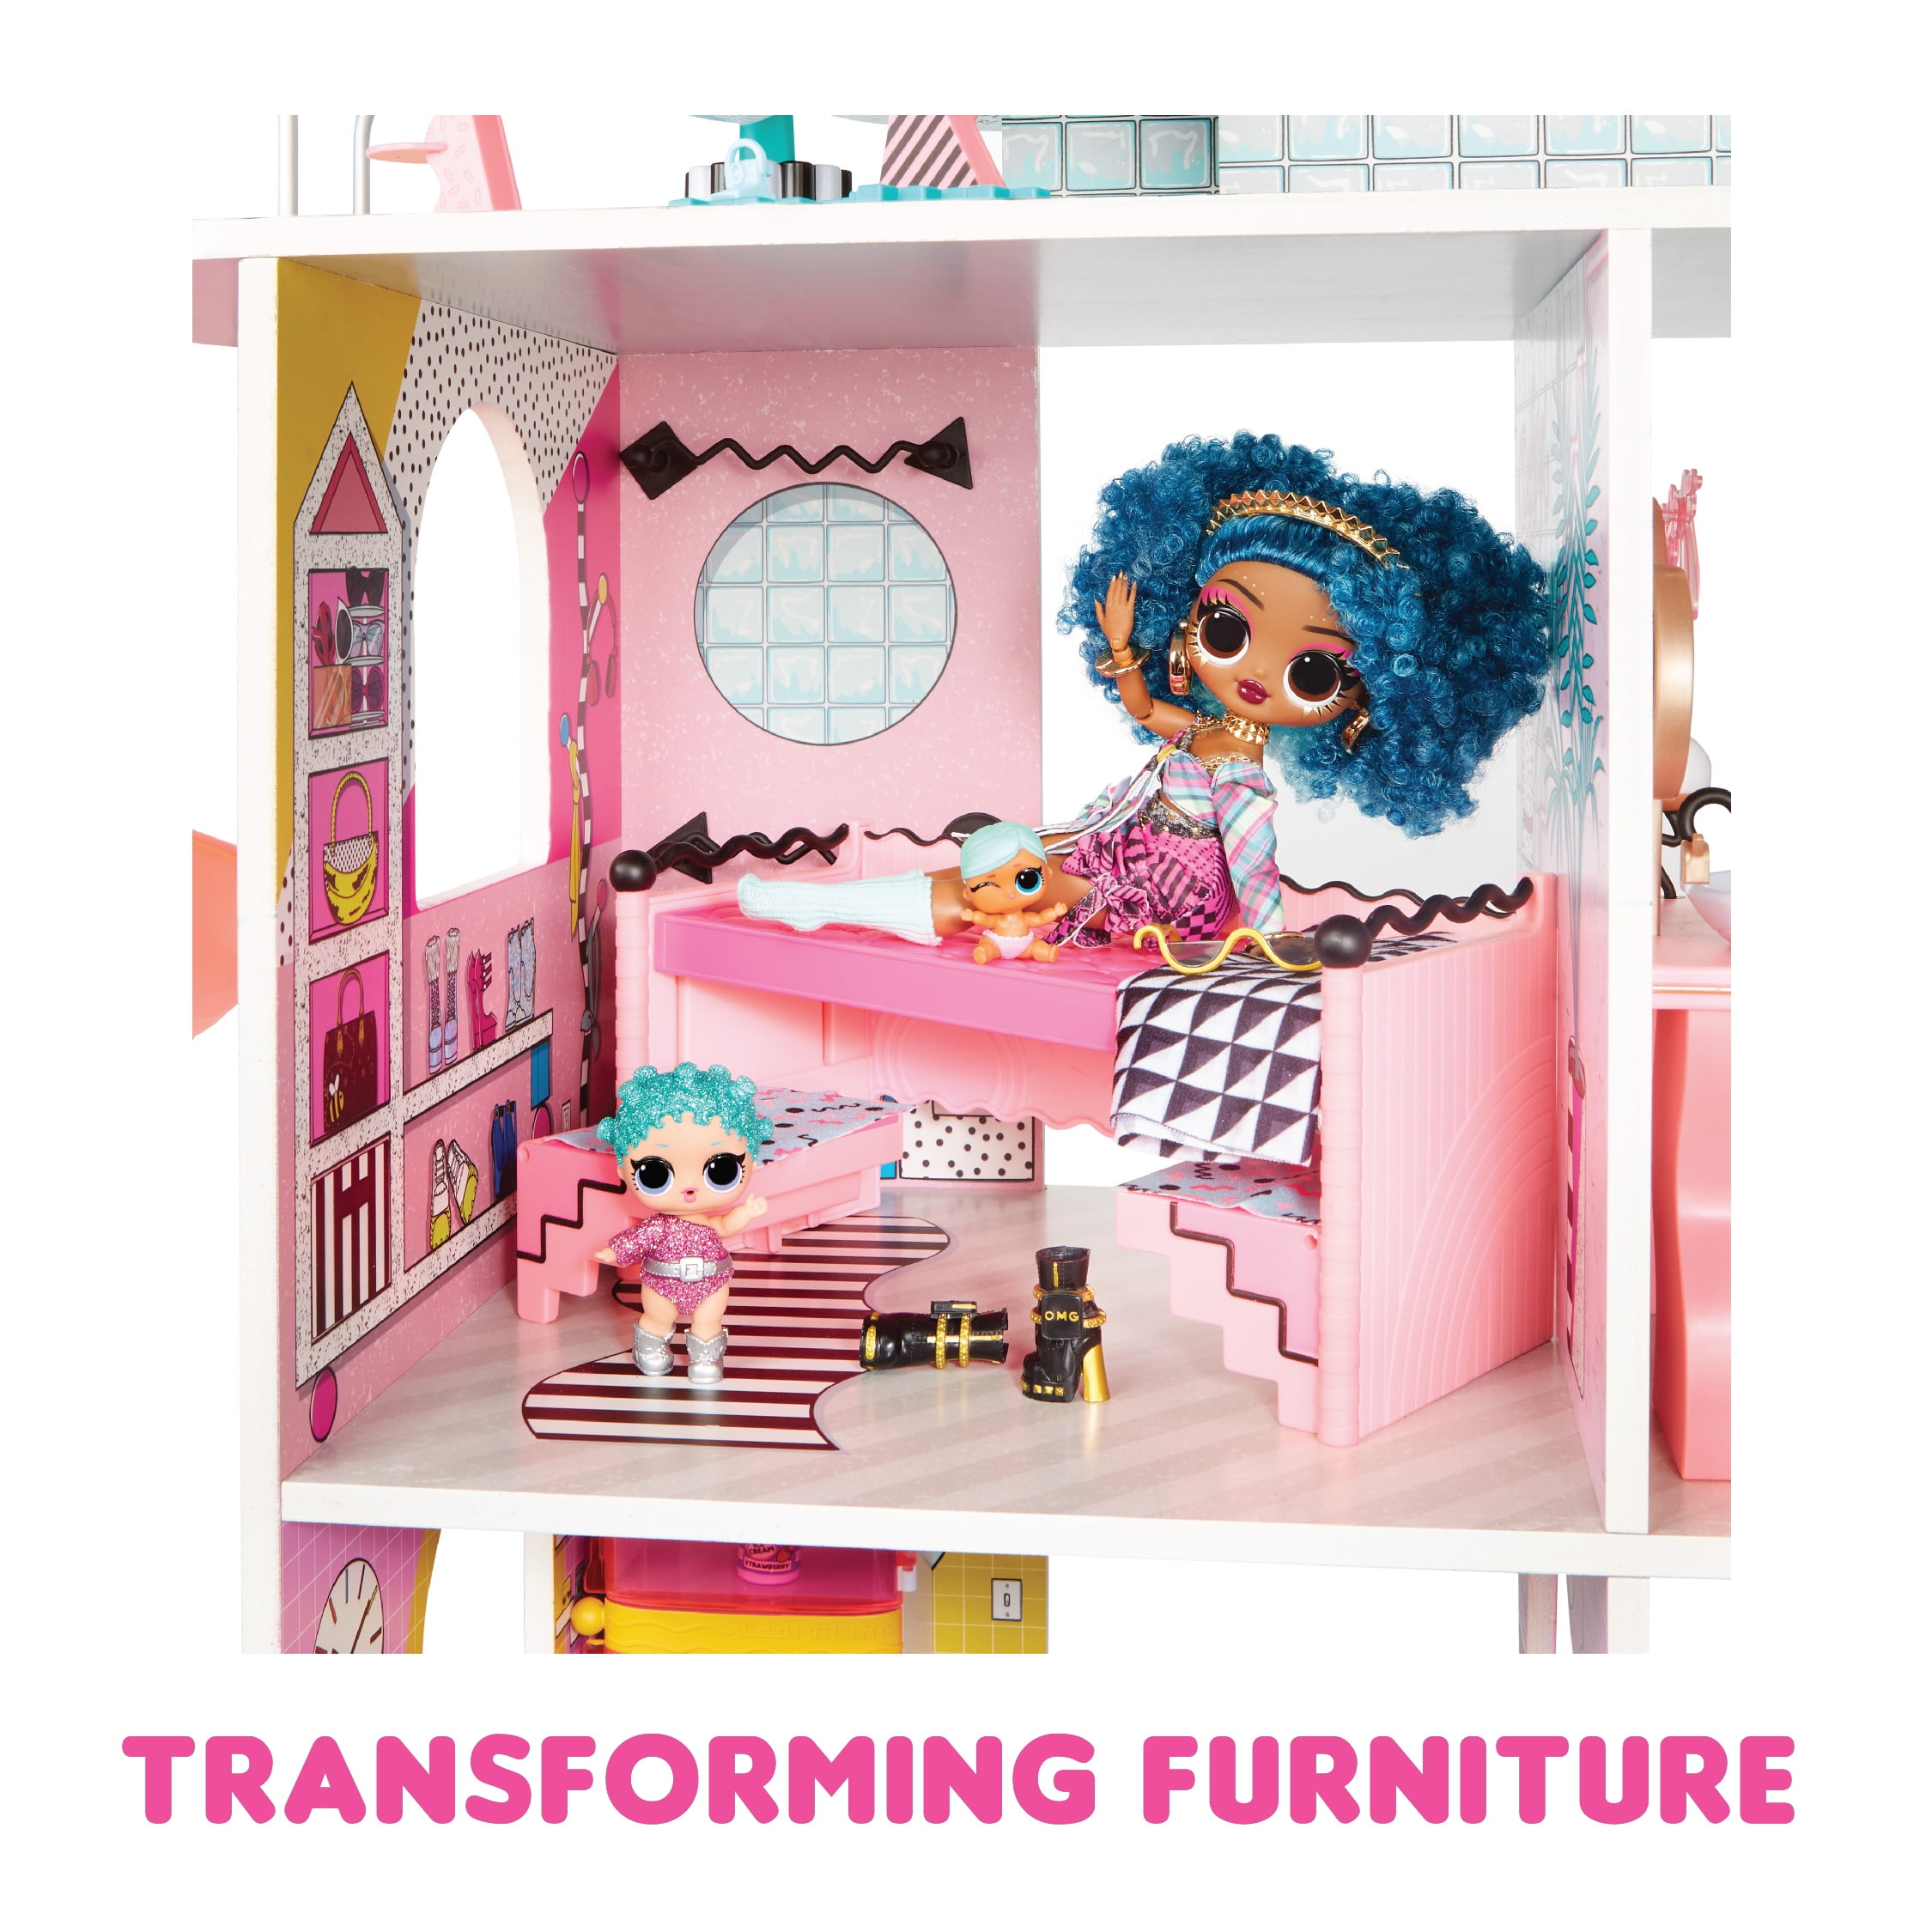 L.O.L. Surprise! 423676C3 OMG House New Real Wood Doll House Multicolor 